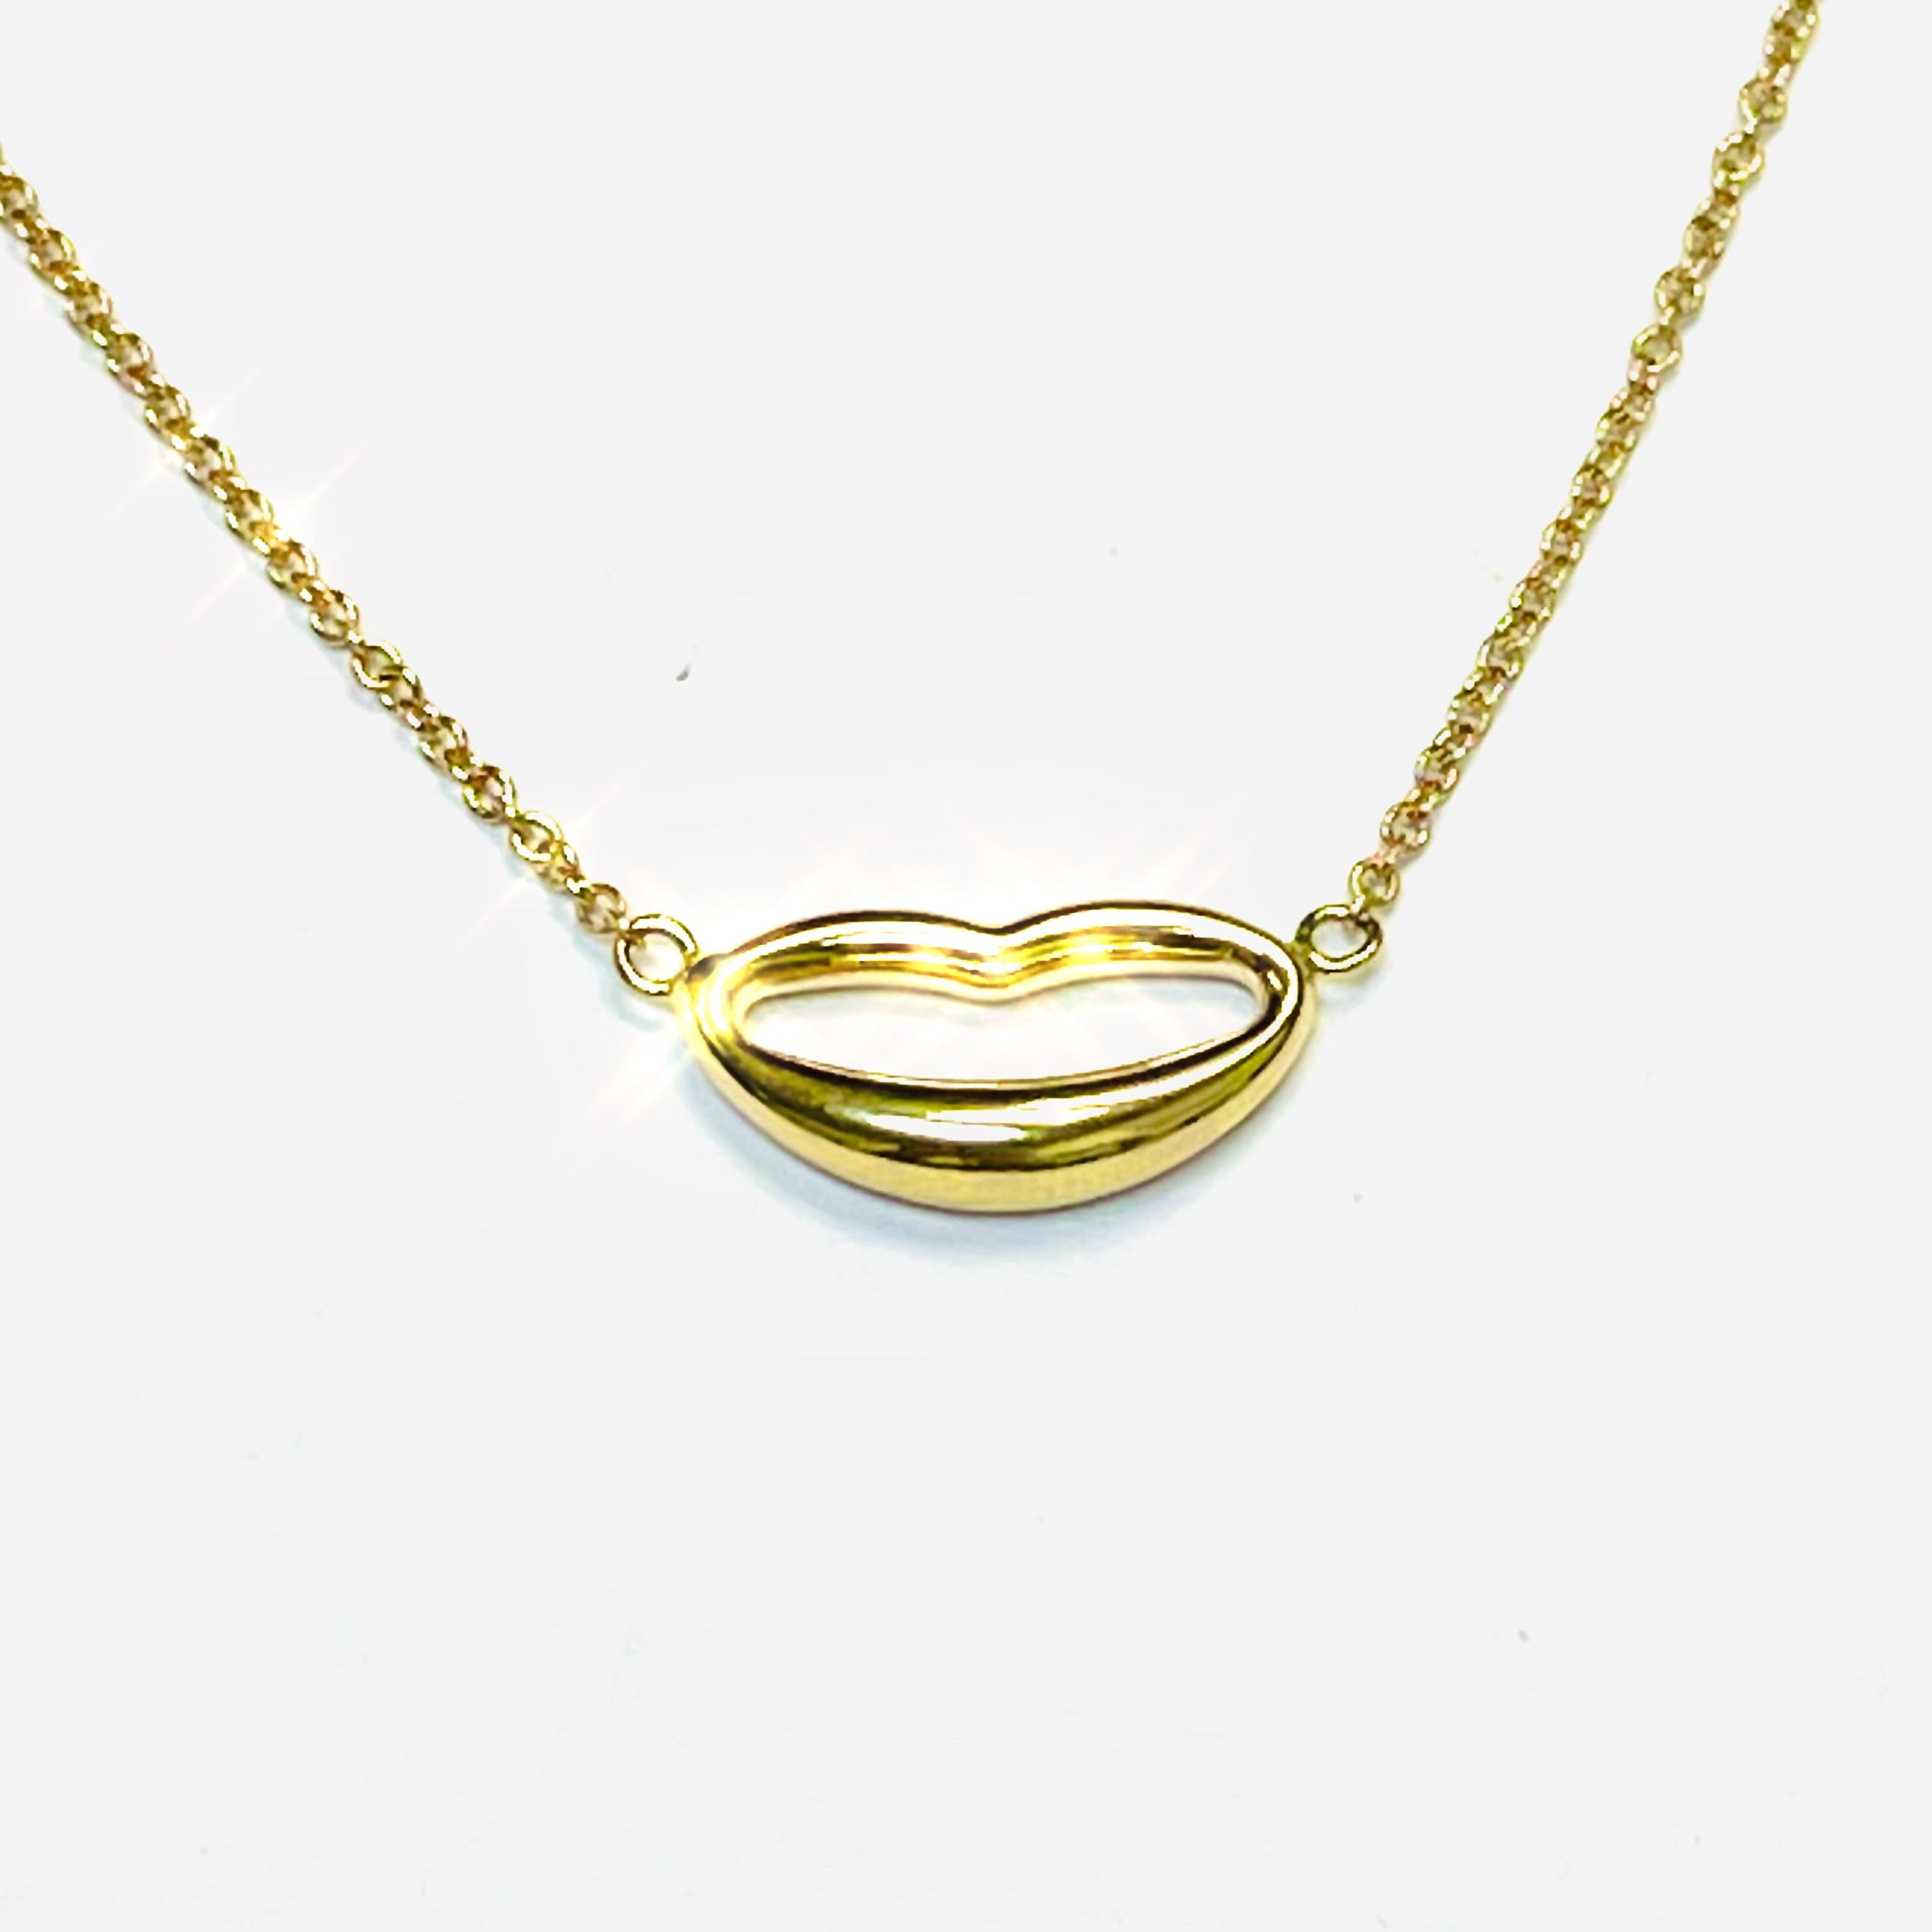 14K Yellow Gold Lip Necklace 16-17”